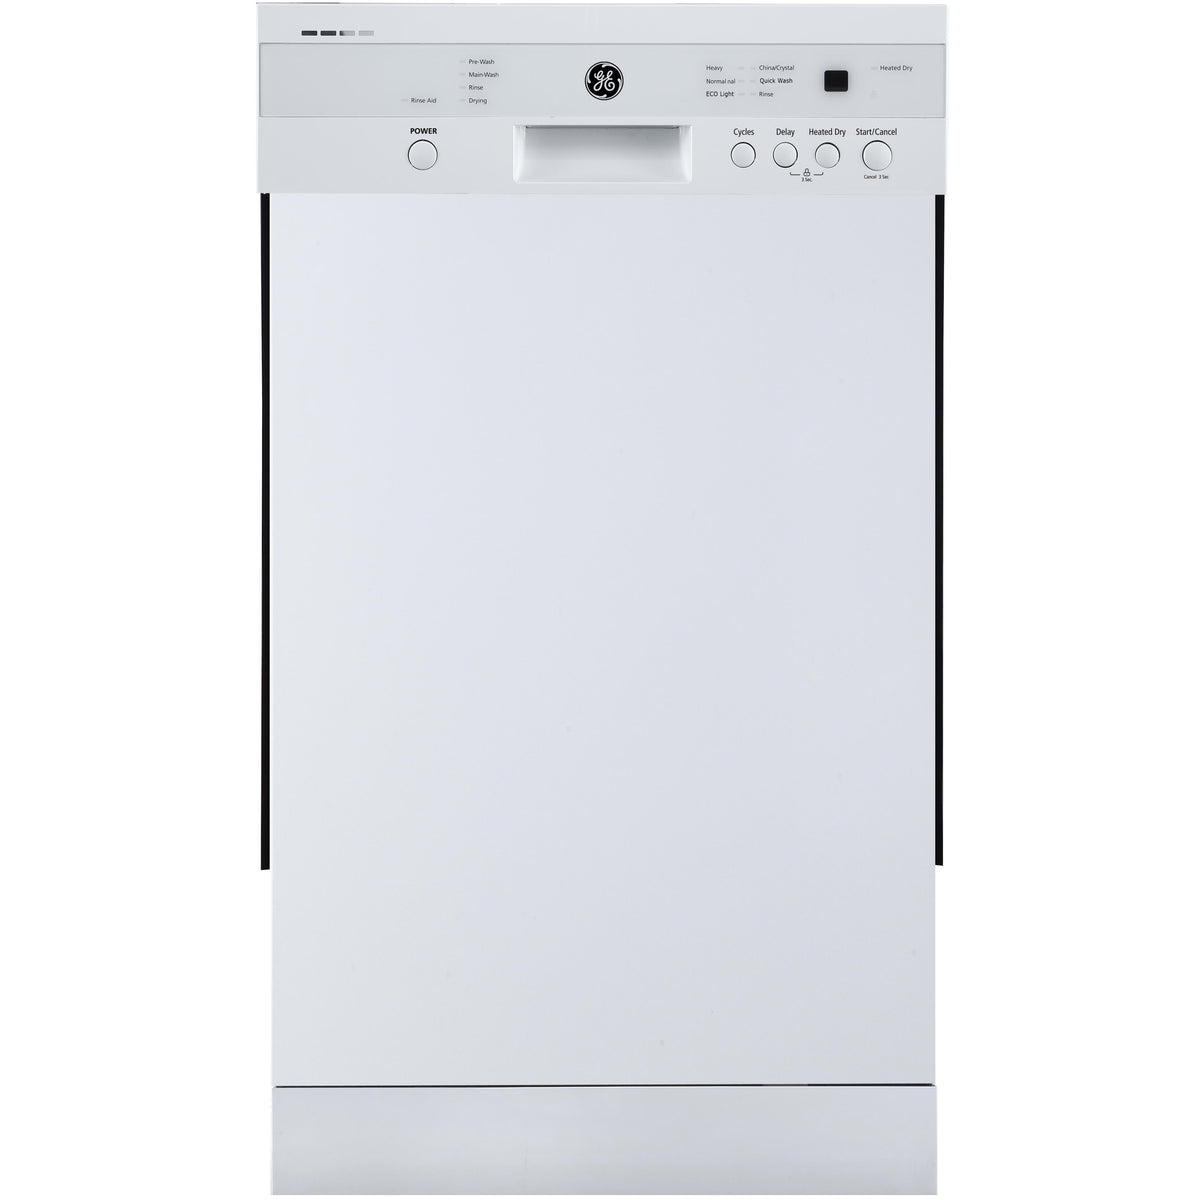 GE 18-inch Built-in Dishwasher with Stainless Steel Tub GBF180SGMWW IMAGE 1